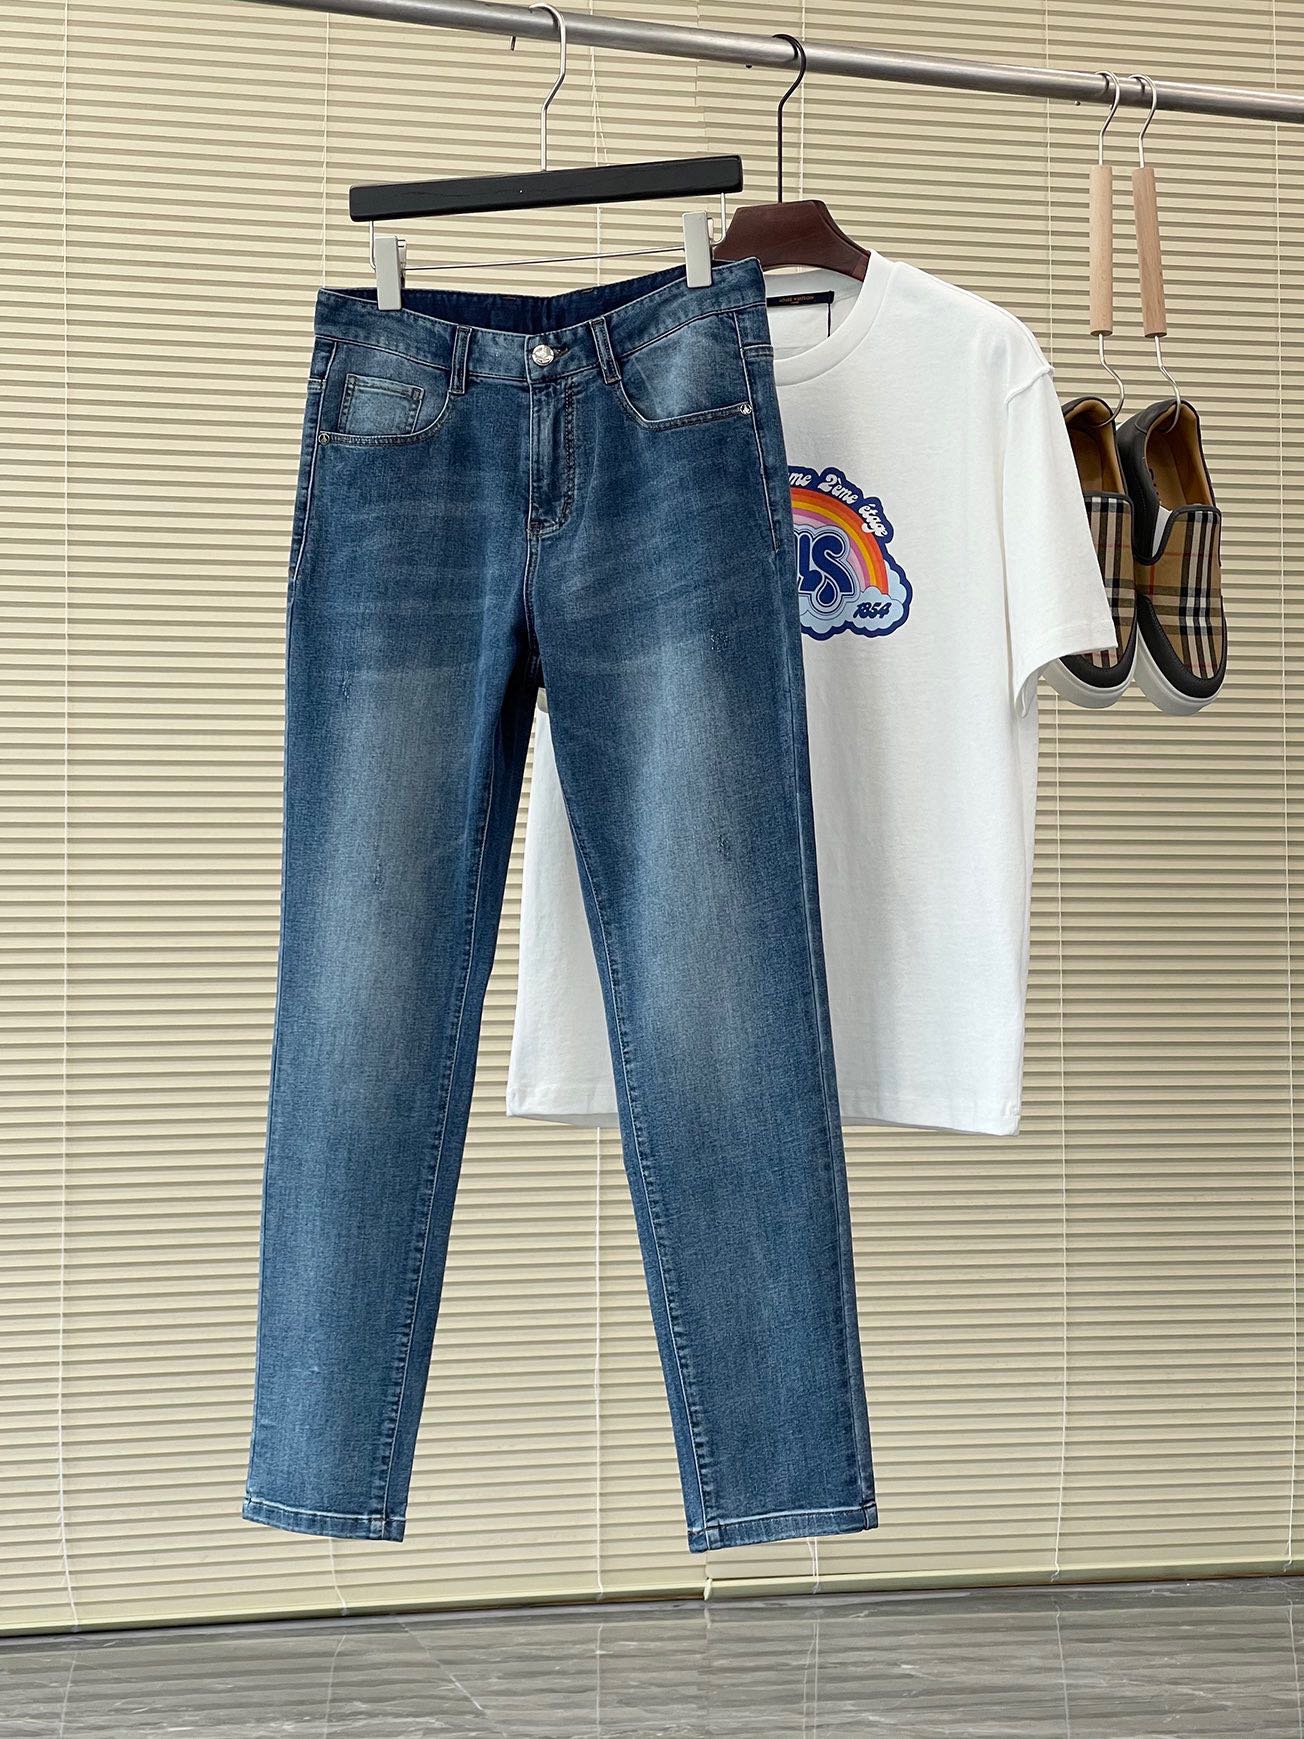 Clothing Jeans Pants & Trousers Blue White Men Denim Spring/Summer Collection CE005129